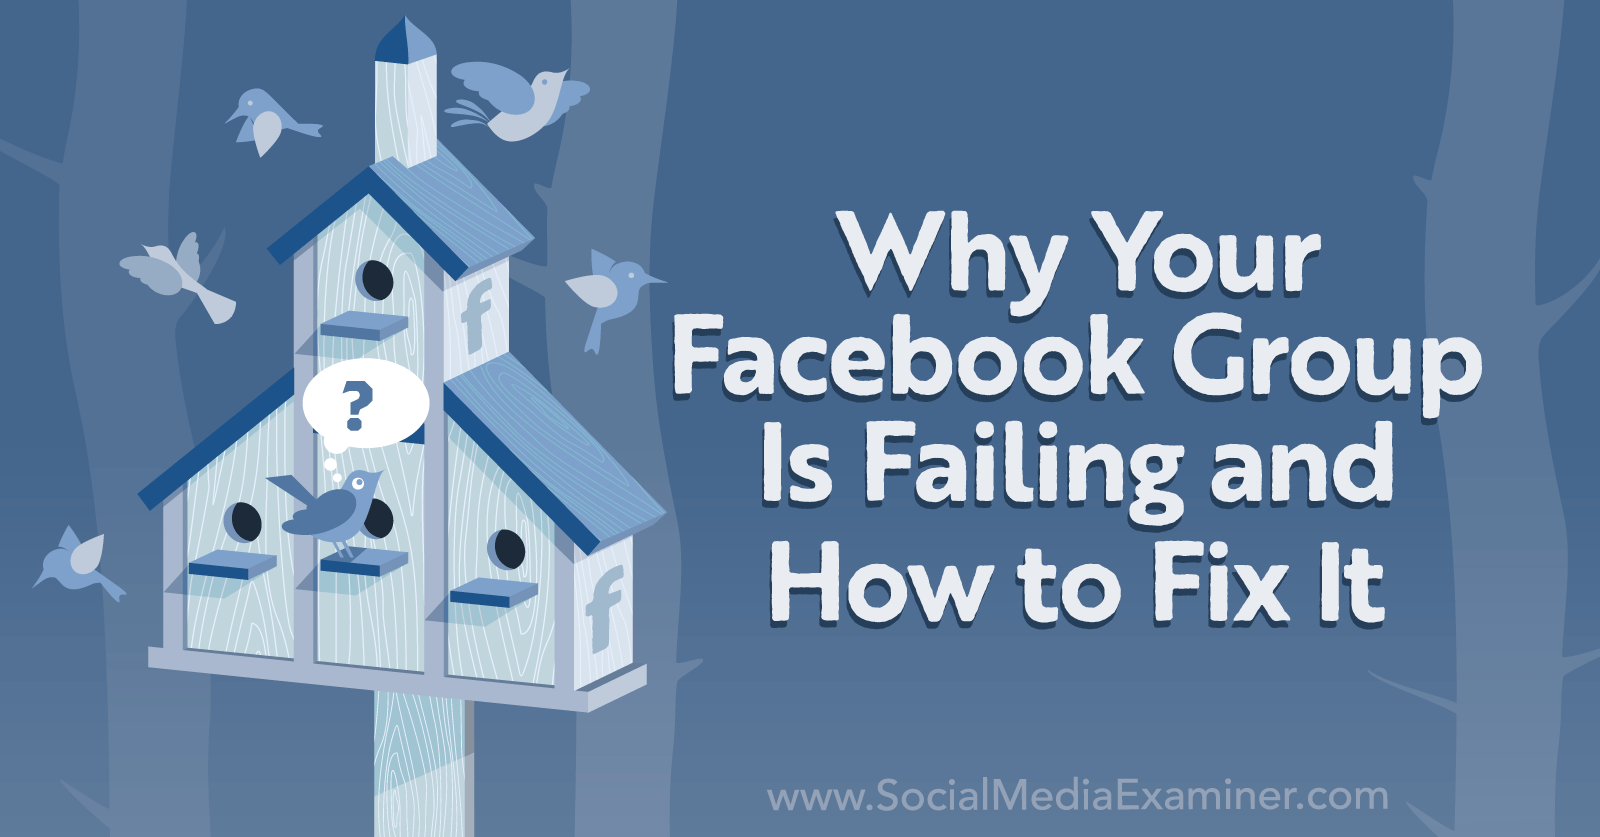 Why Your Facebook Group Is Failing and How to Fix It featuring insights from Dana Malstaff on the Social Media Marketing Podcast.